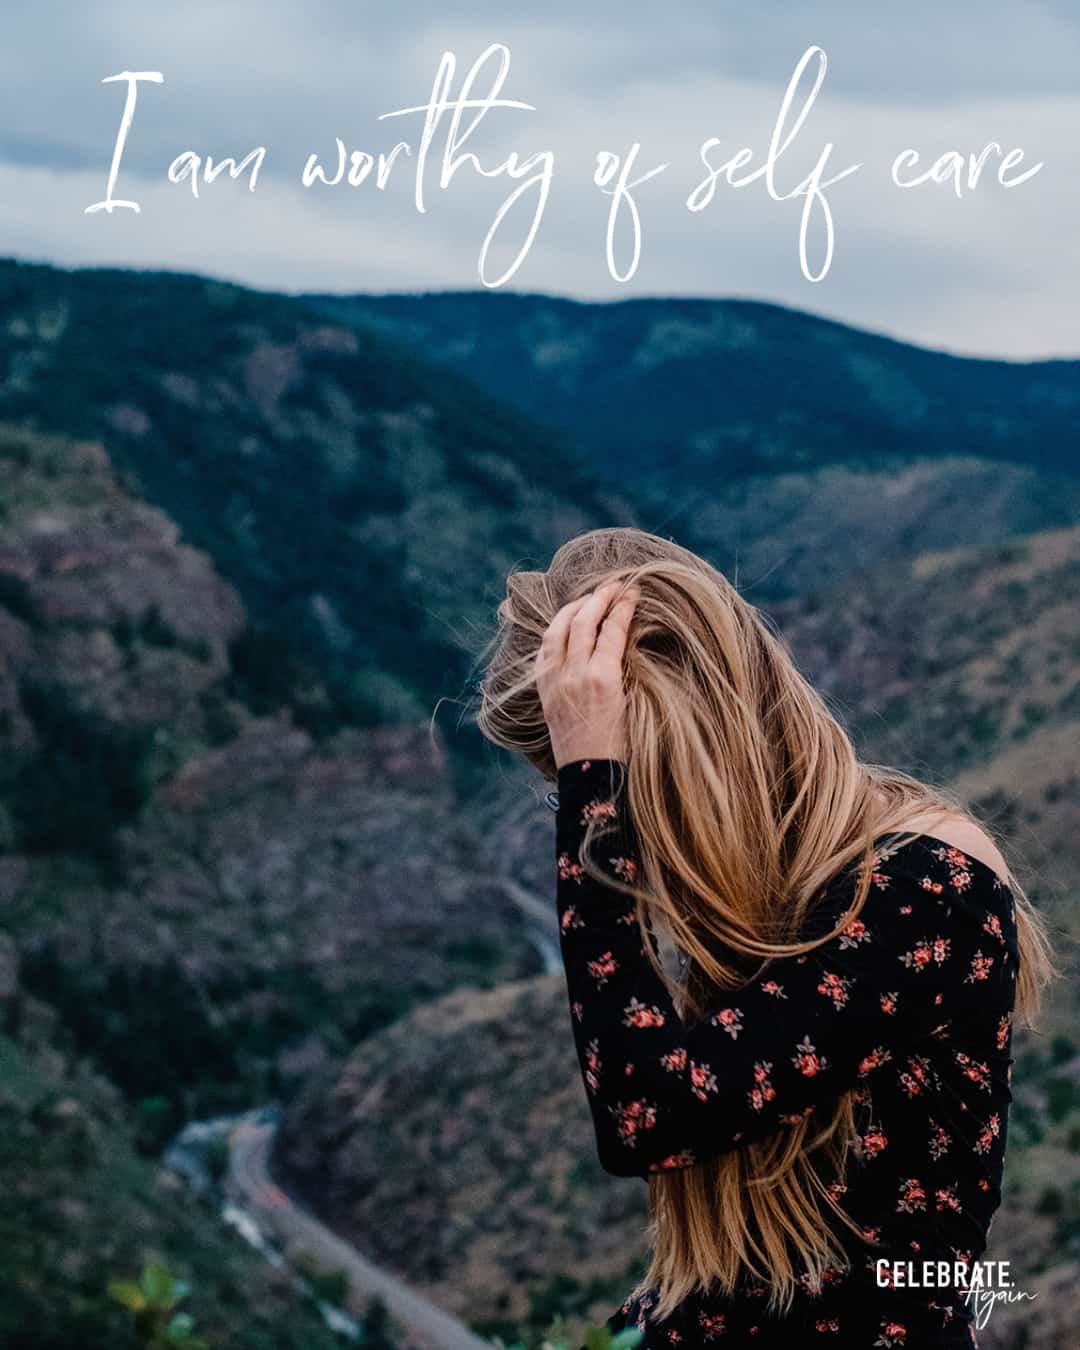 "I am worthy of self care" as a mom quote by Celebrate Again view of a woman pulling her hair back on the top of a mountain cliff